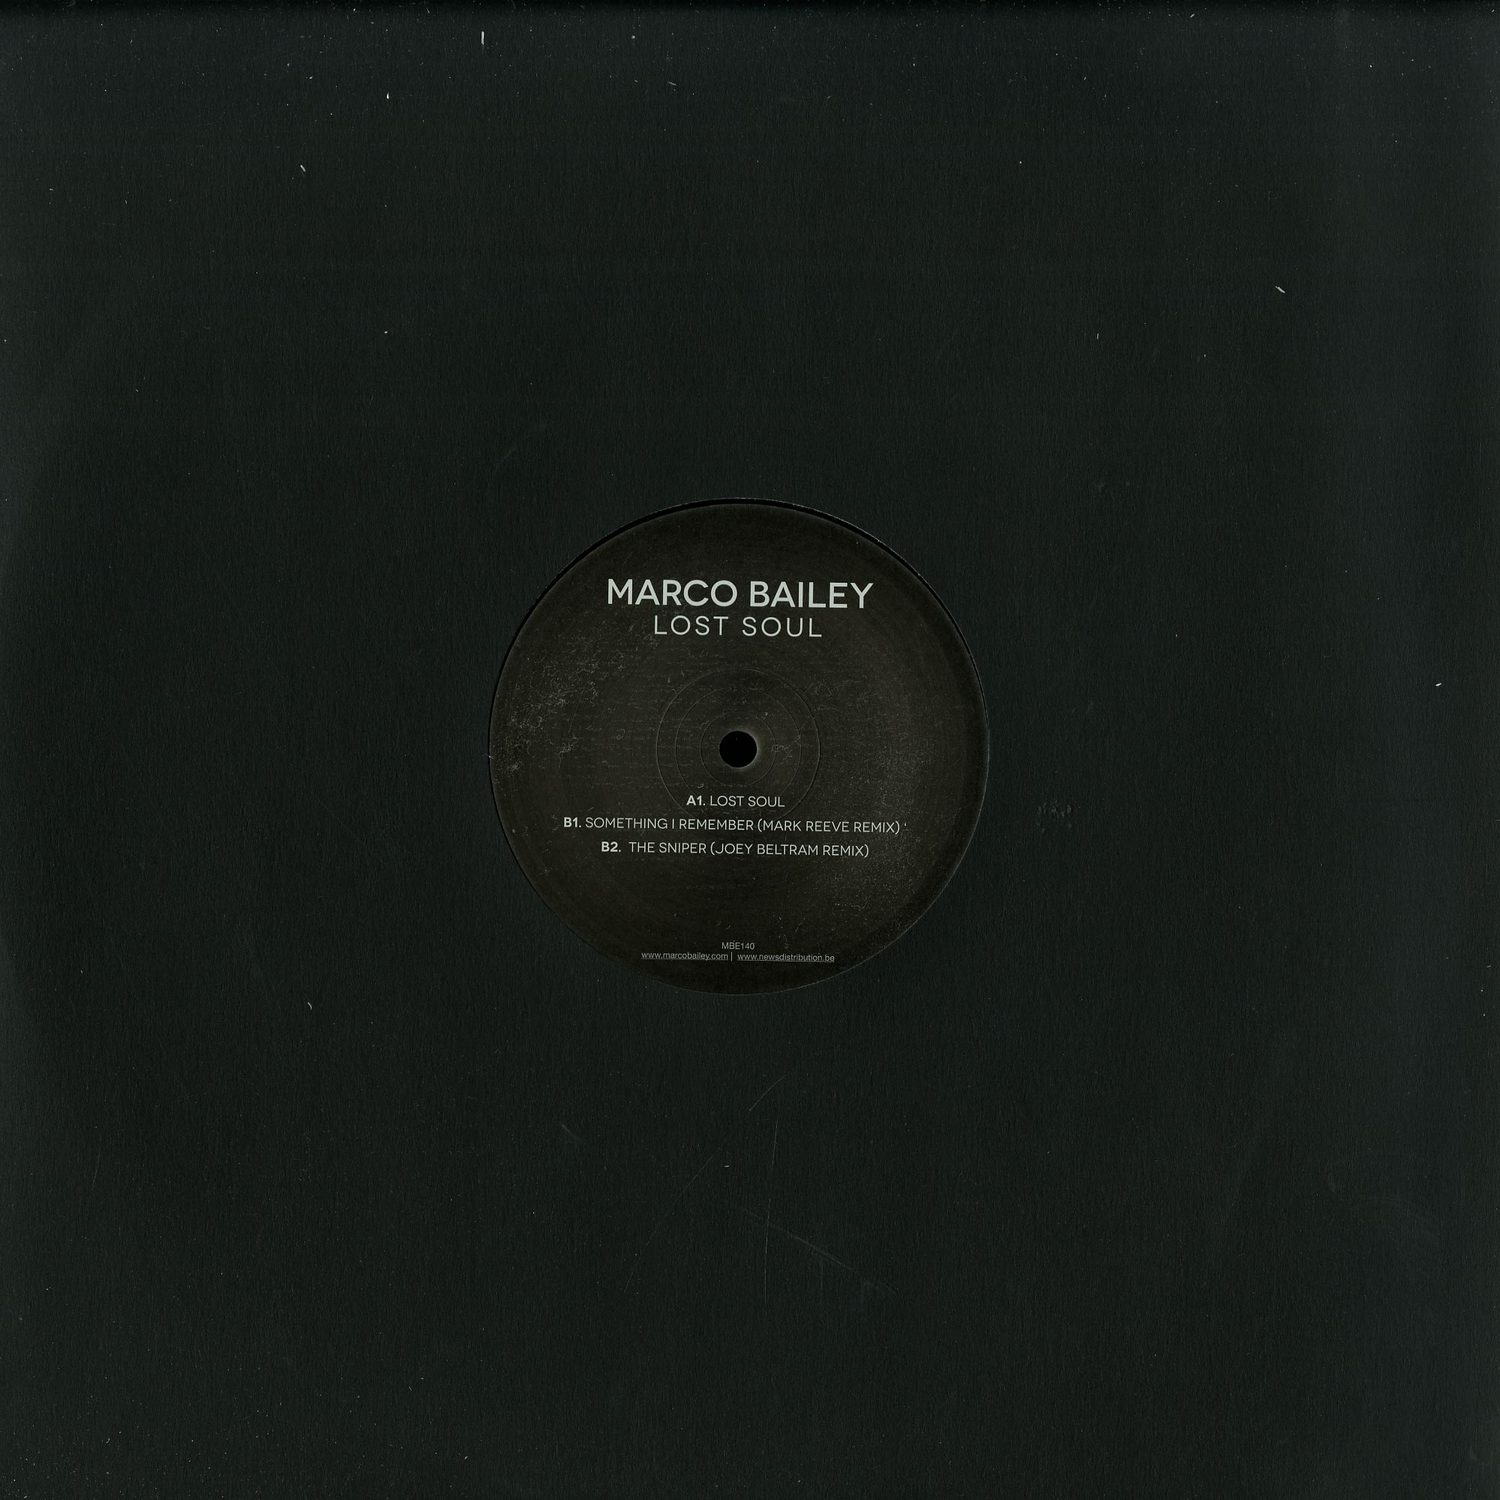 Marco Bailey - LOST SOUL EP 